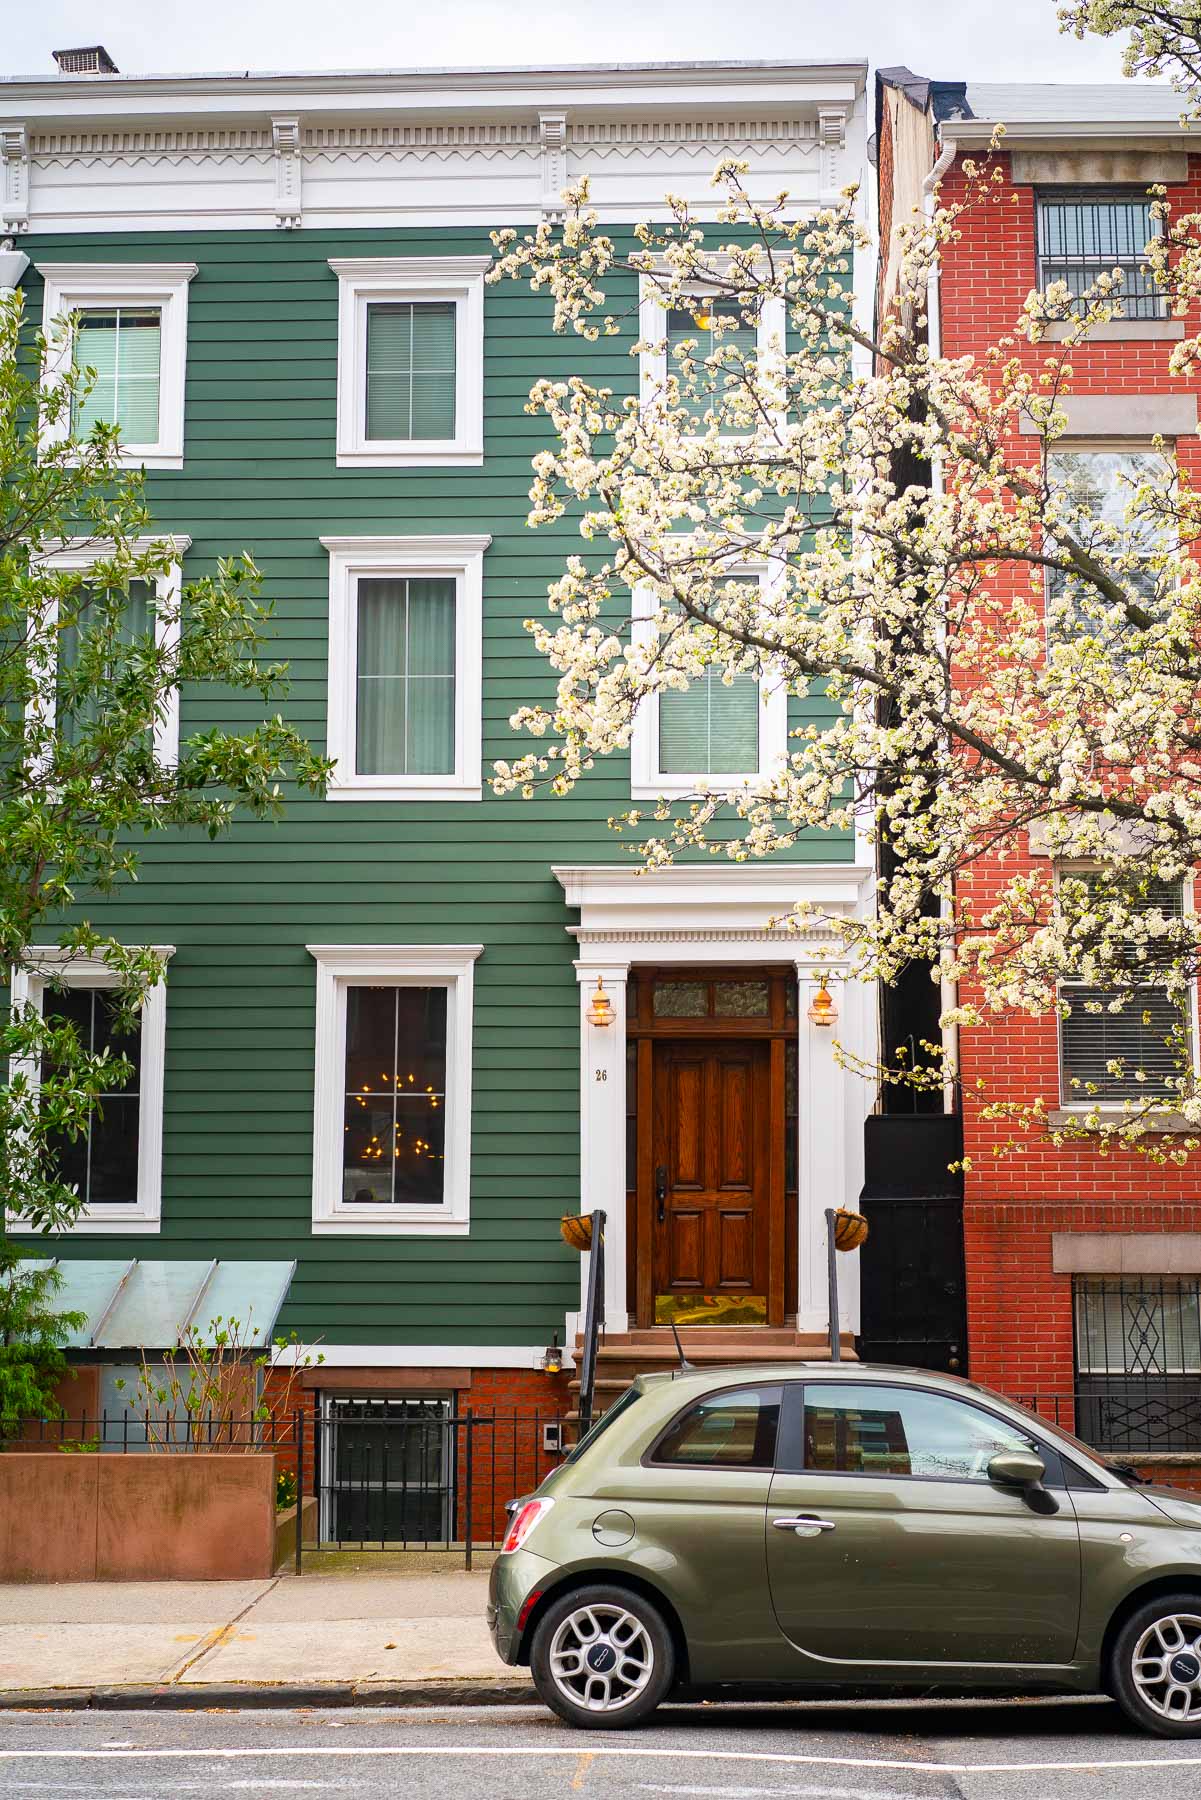 A white cherry blossom tree branch blooming in front of a green row house in Carroll Gardens Brooklyn, with a small green car parked in the front street, best neighborhoods to live in Brooklyn